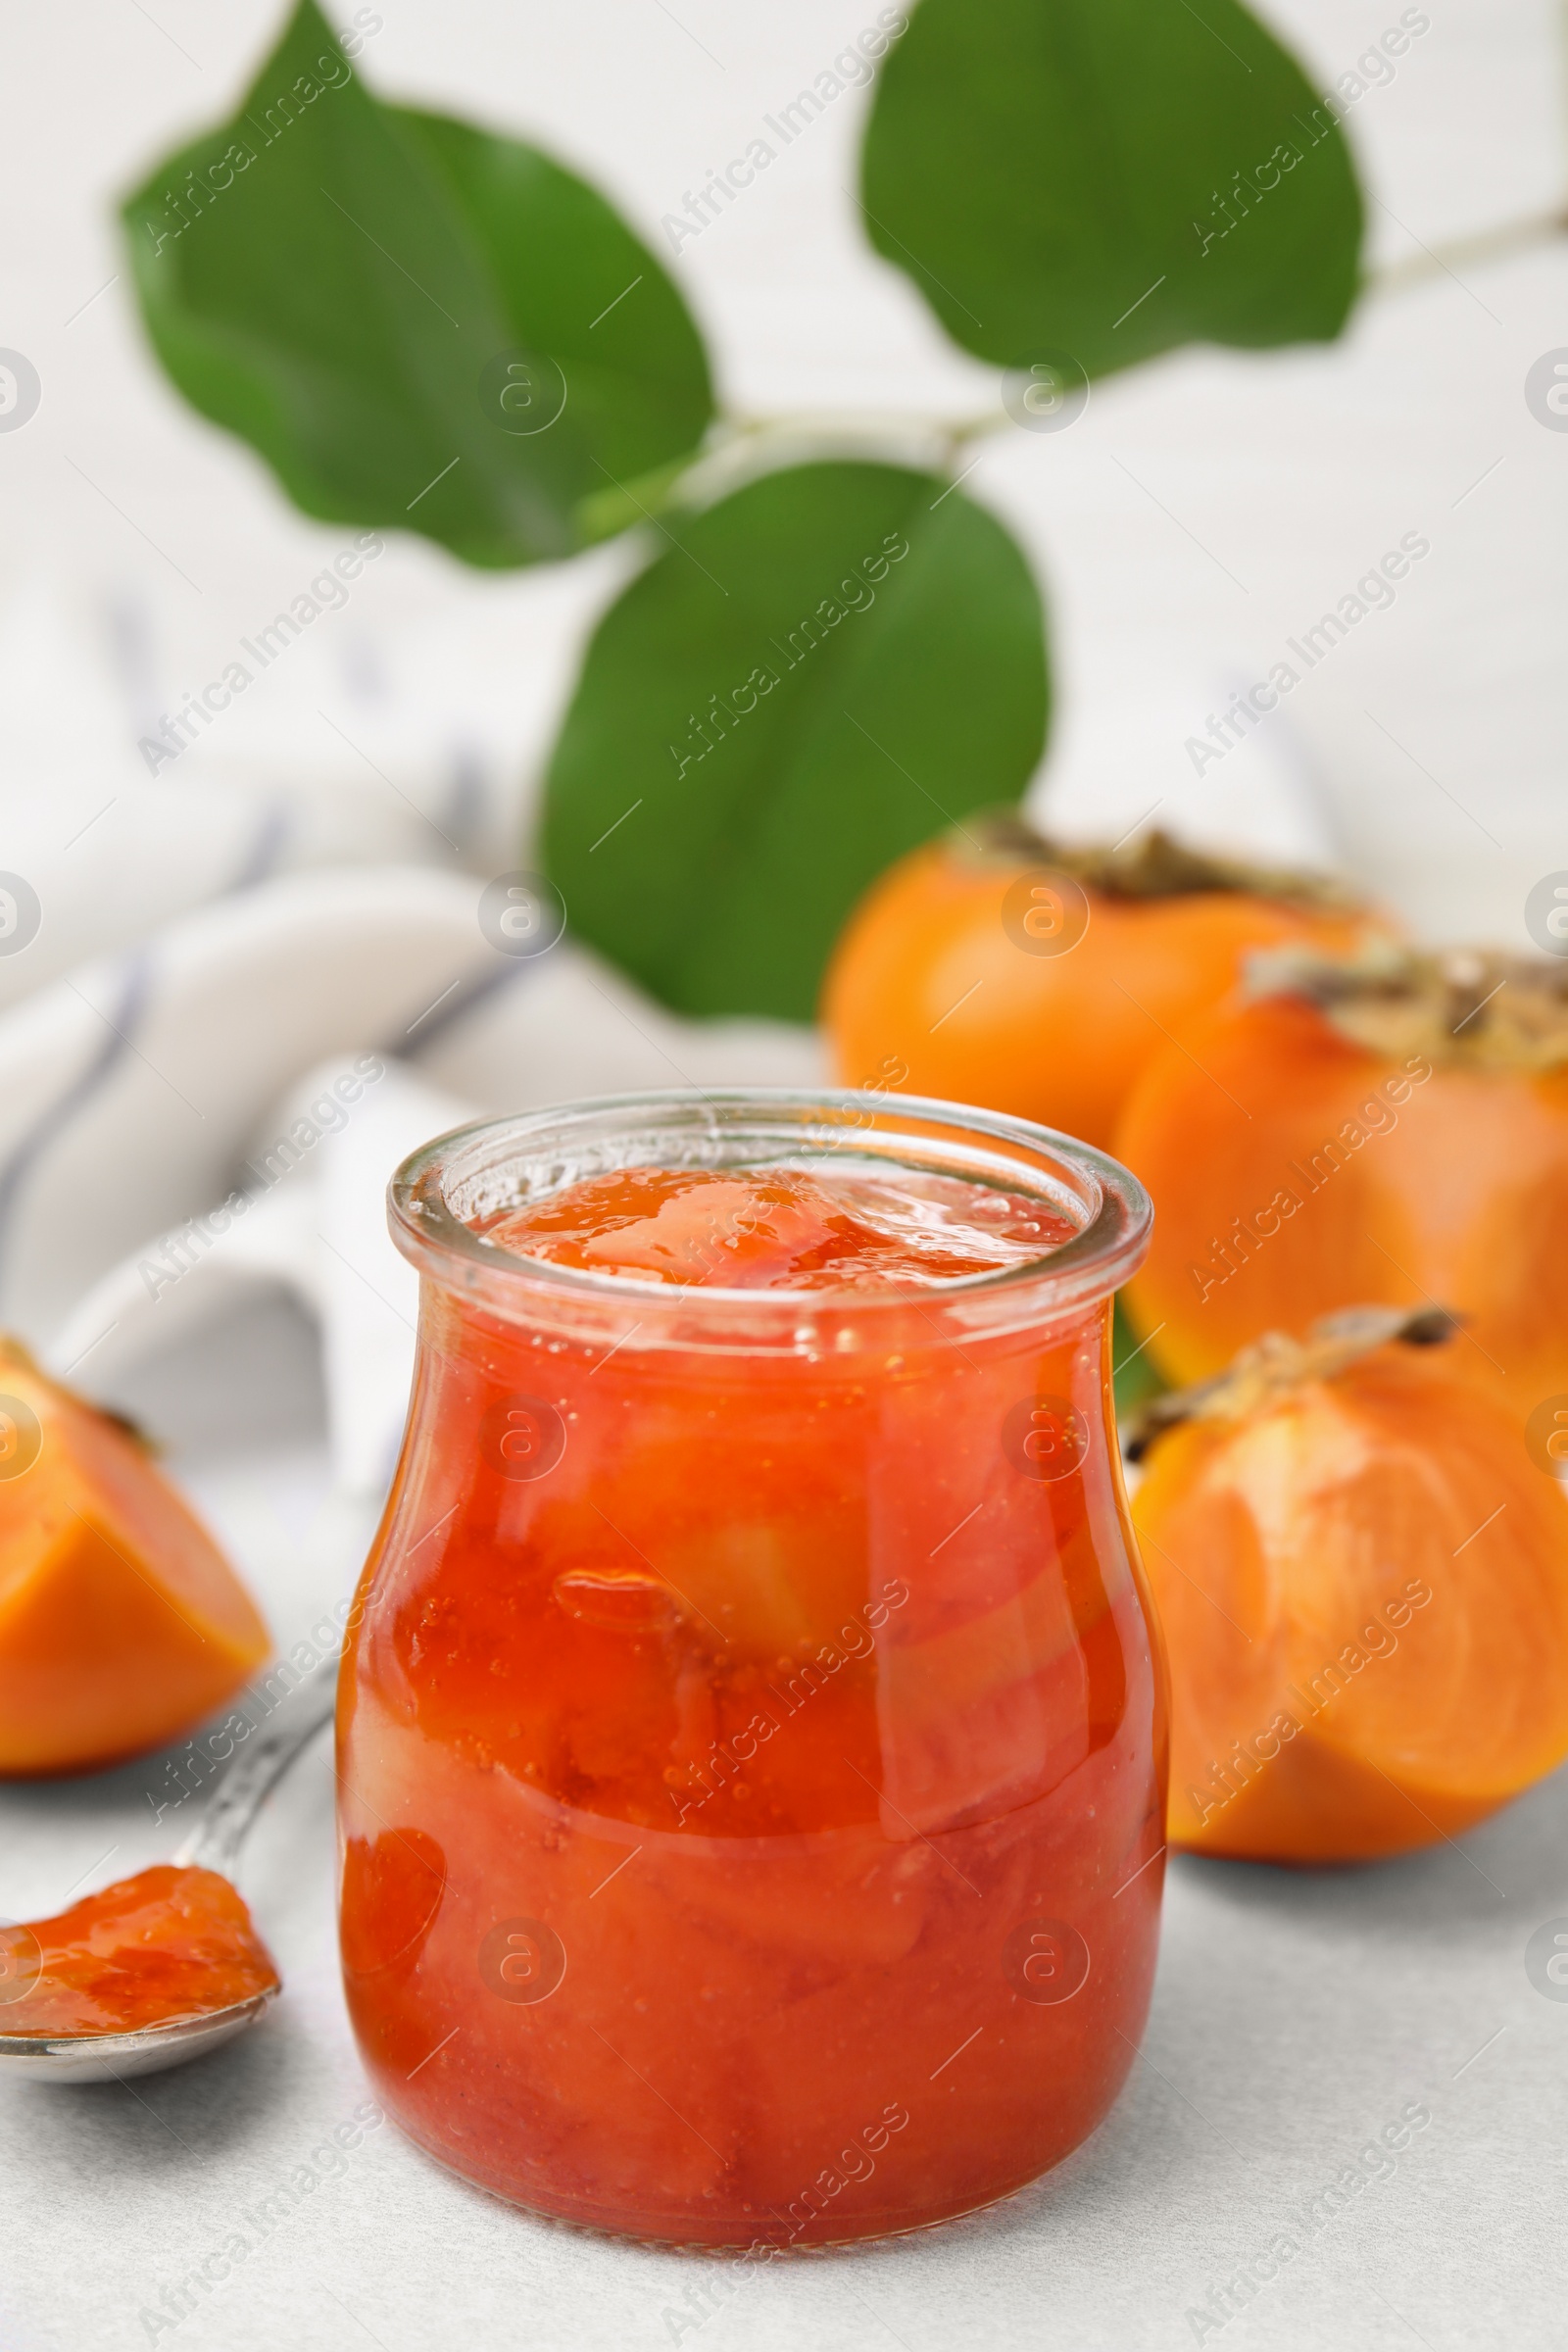 Photo of Jar of tasty persimmon jam and ingredients on white table